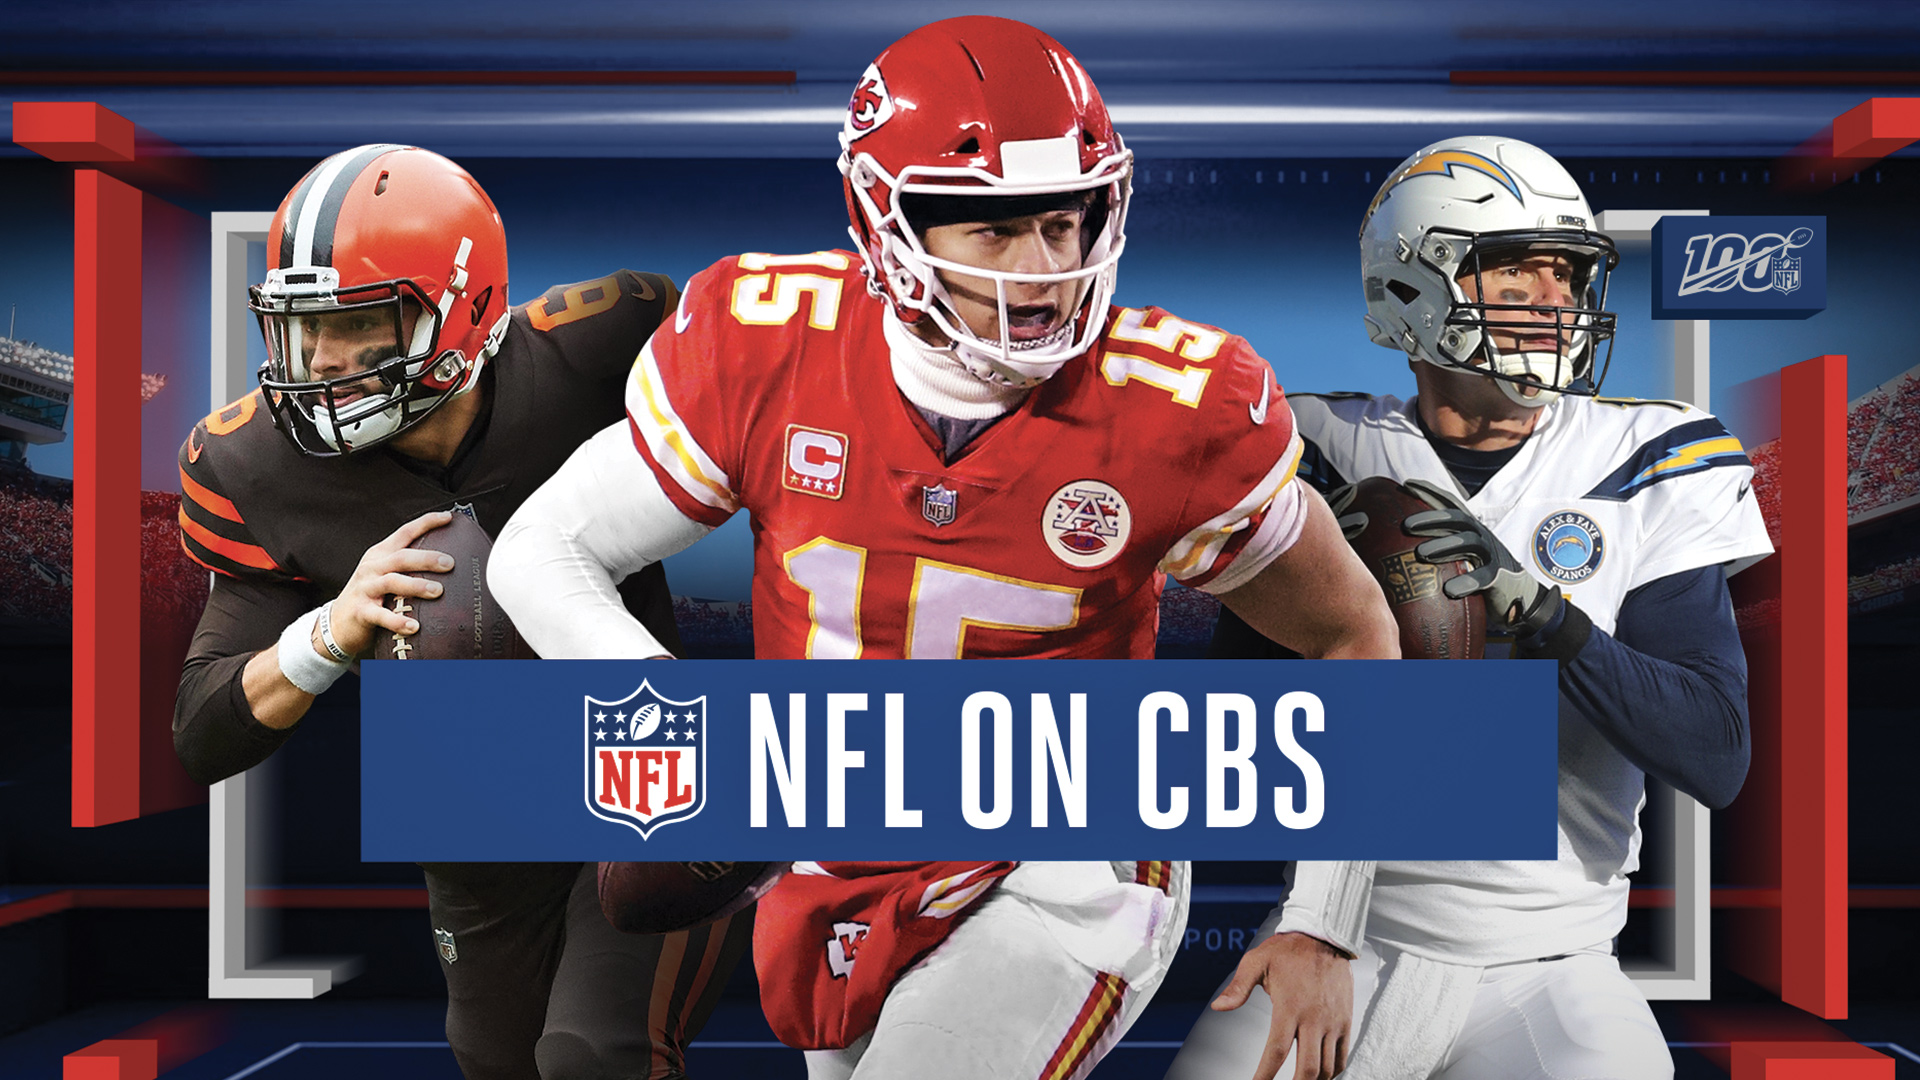 2019 Nfl On Cbs Schedule Watch Live Streaming Football Games With Cbs All Access